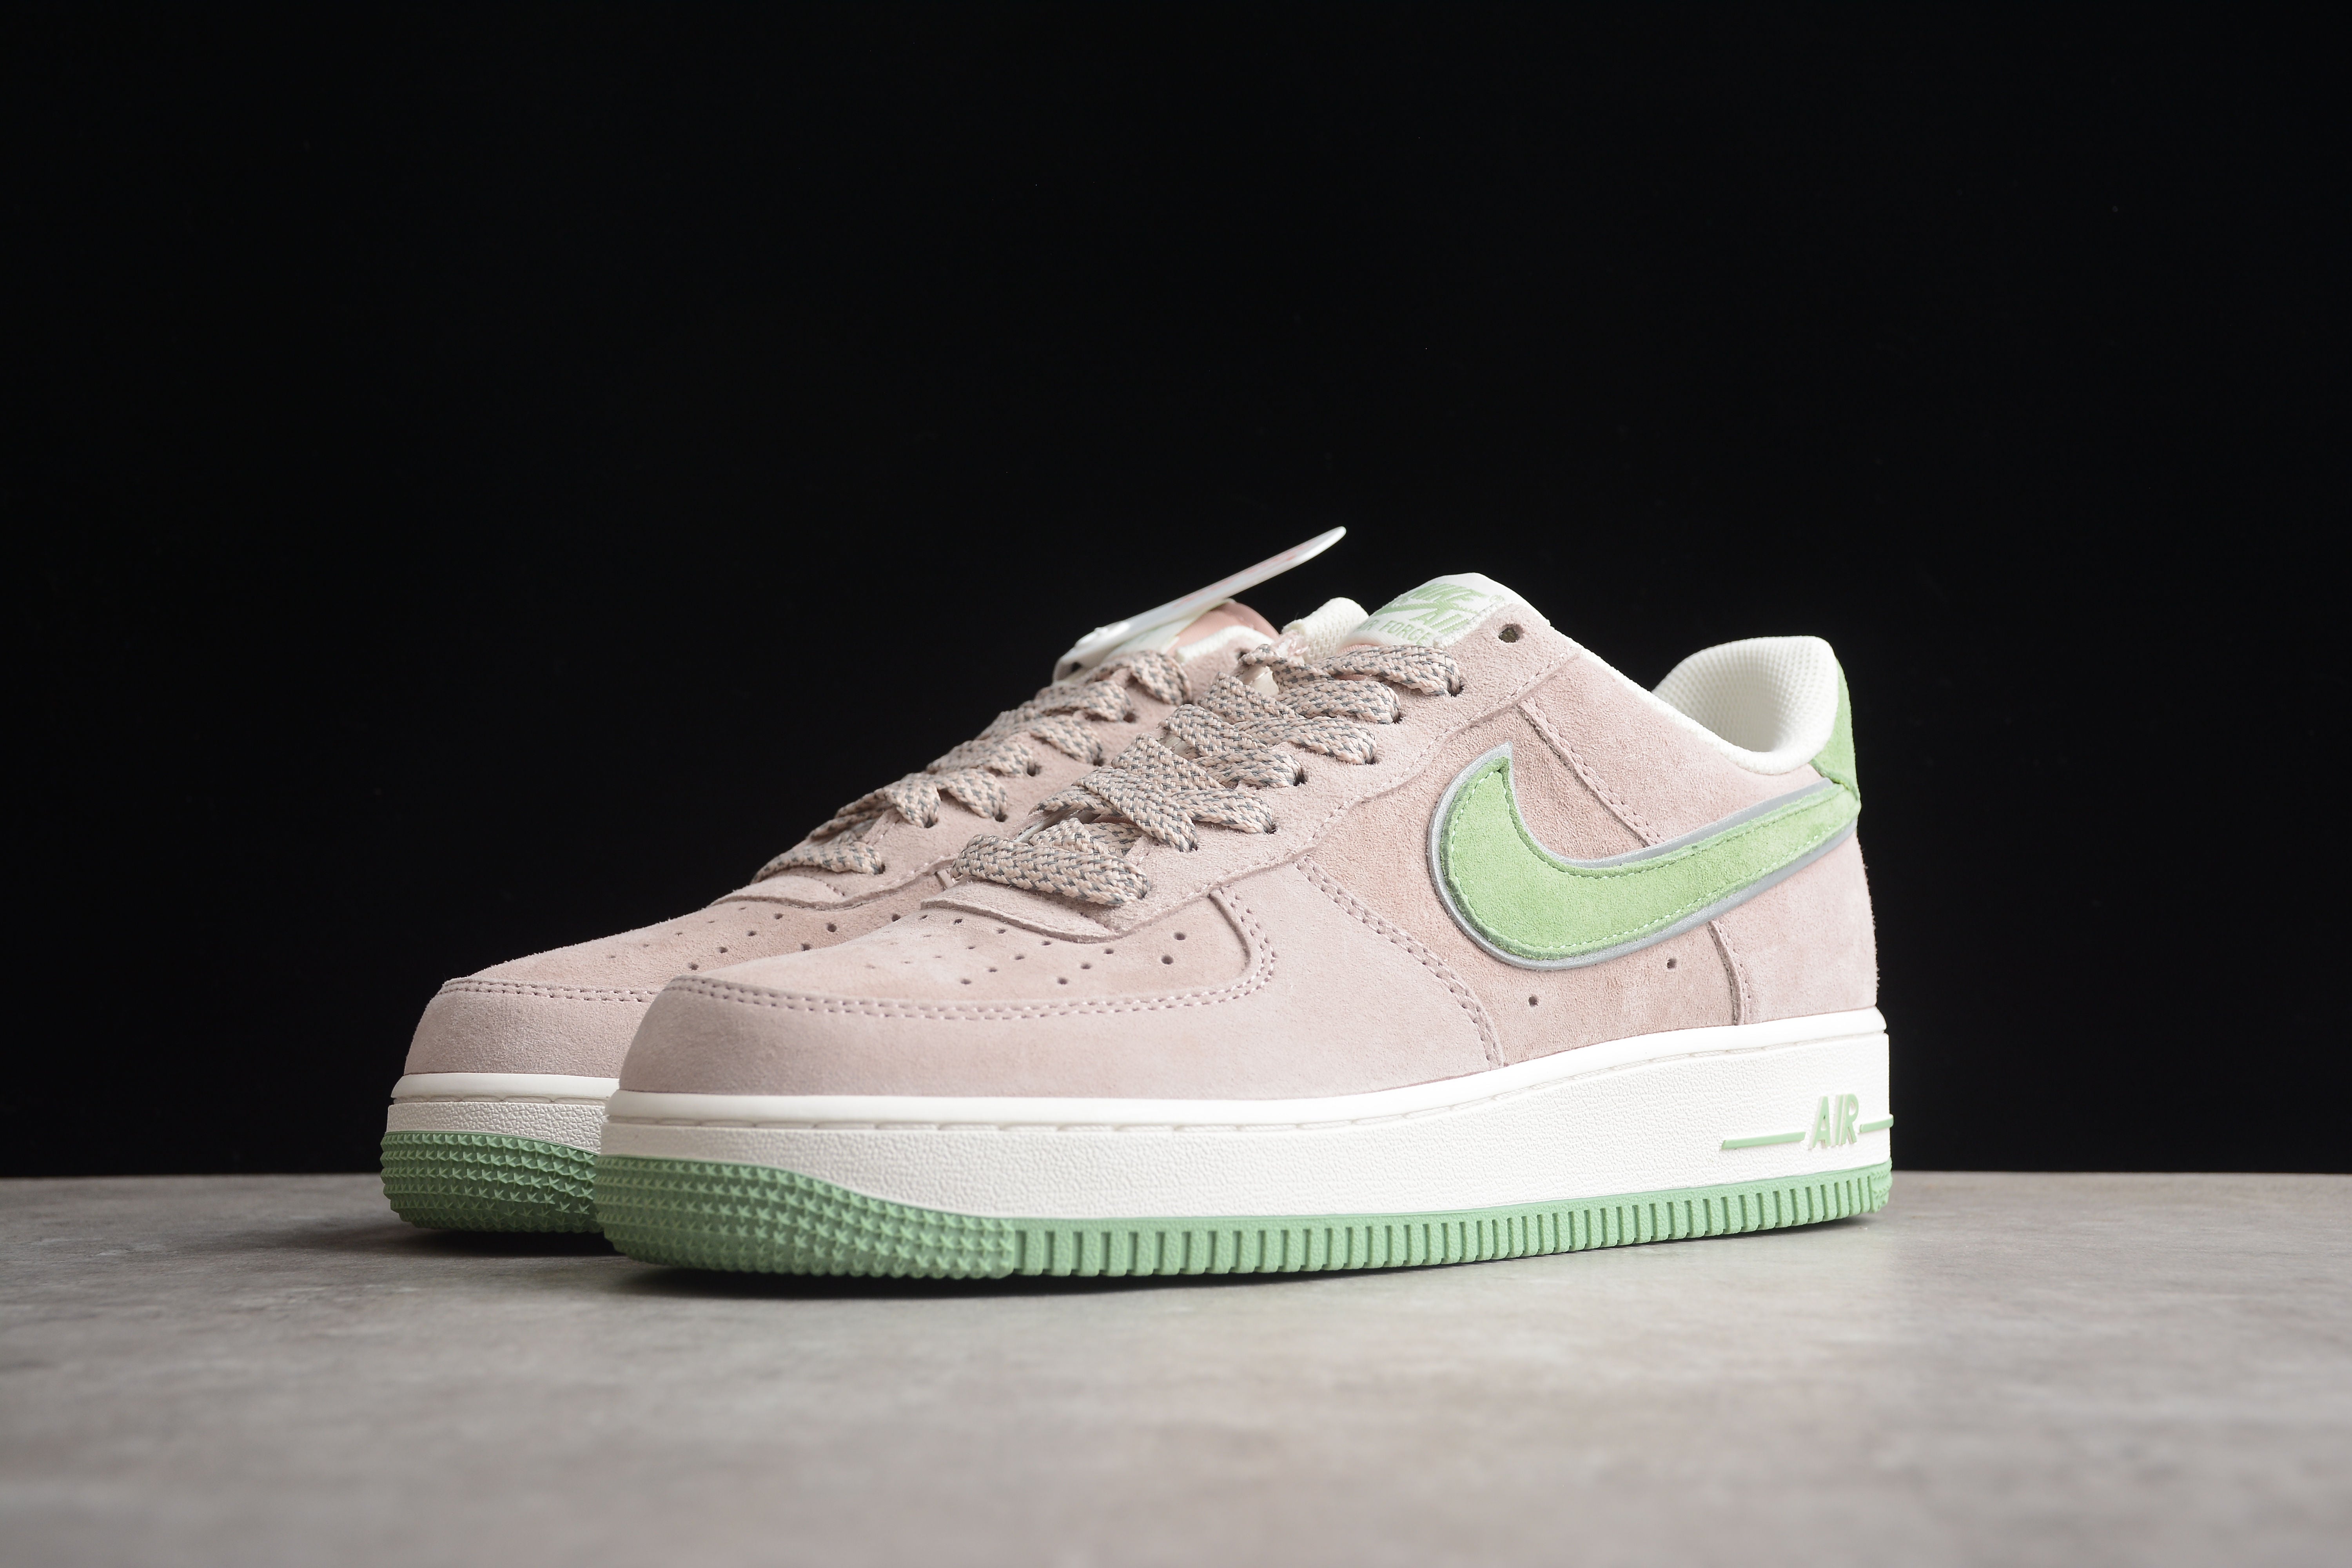 Nike airforce A1 pastels shoes